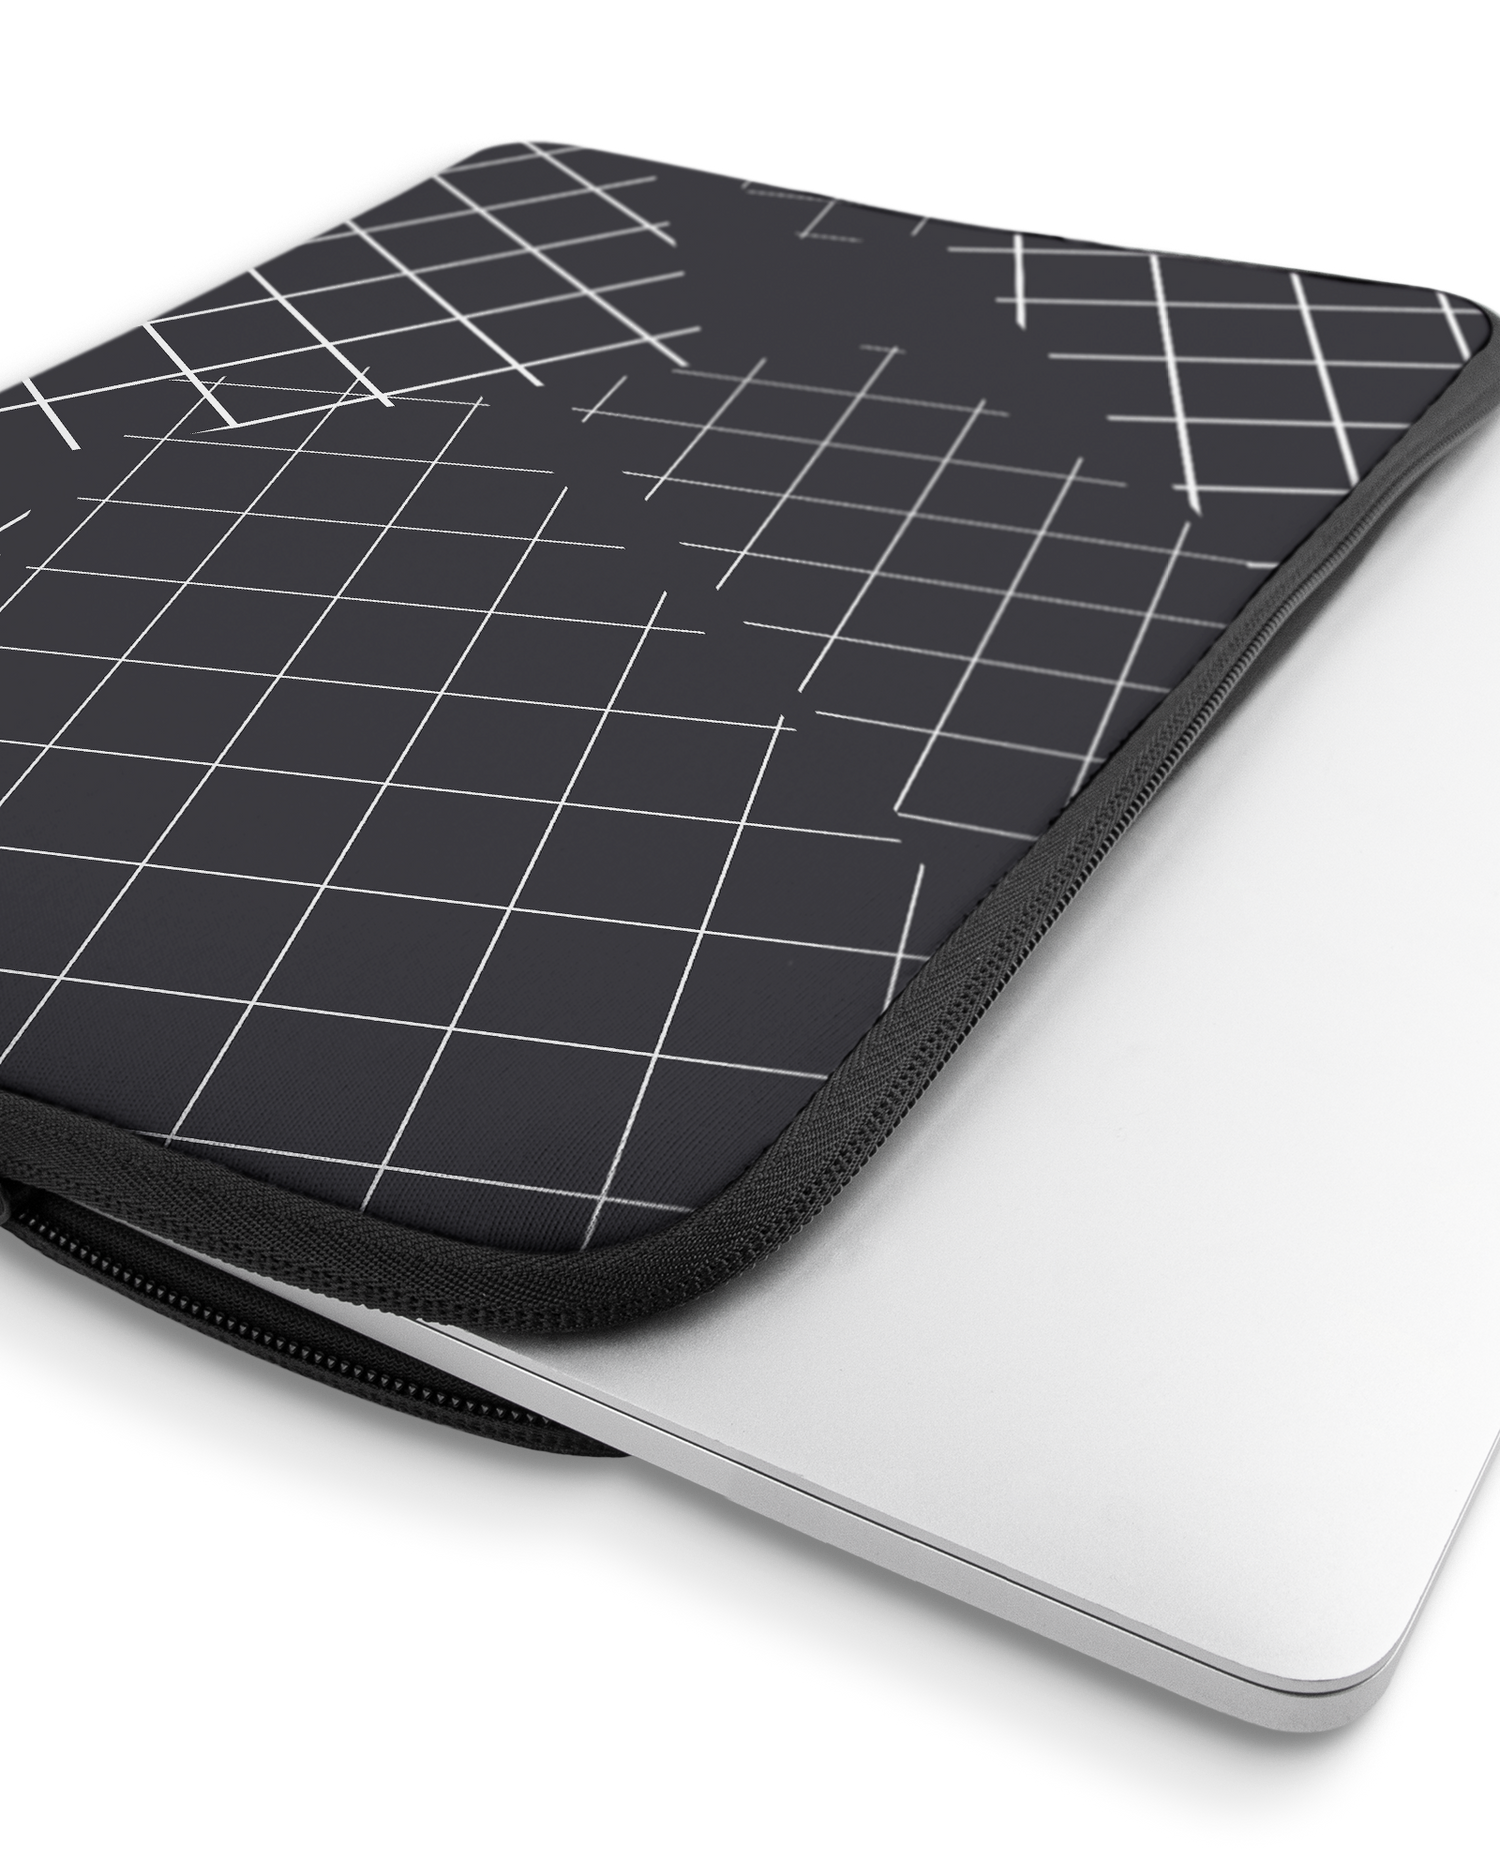 Grids Laptop Case 16 inch with device inside